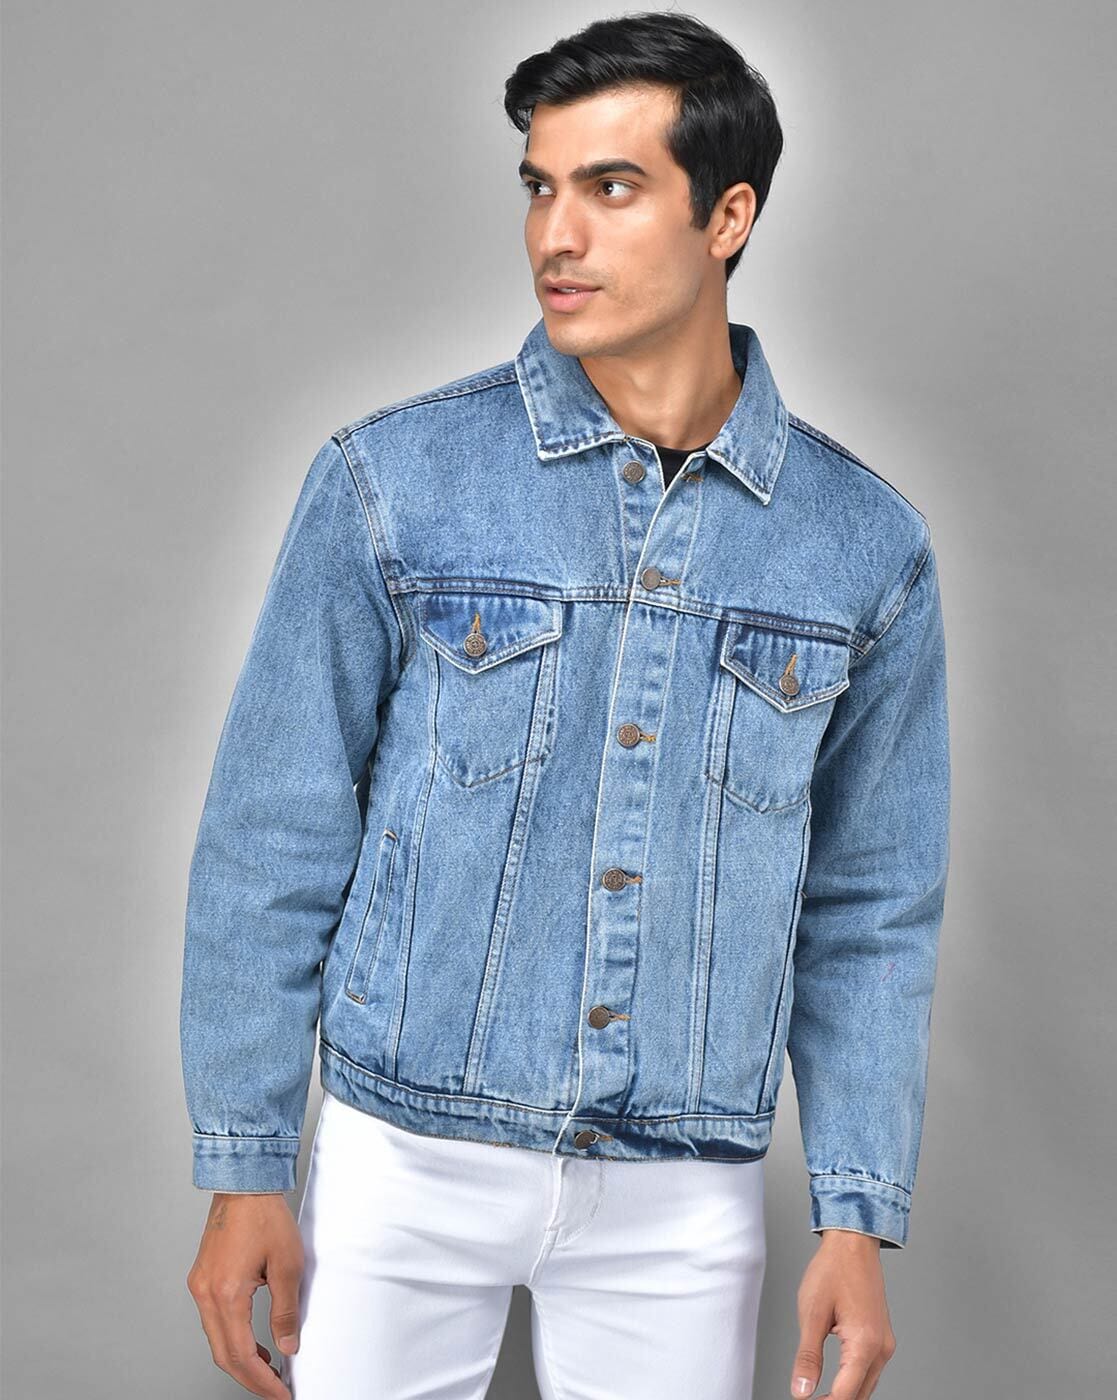 Best Denim Jackets For Men: Redefine Your Wardrobe With Some Trendy And  Fashionable Collection